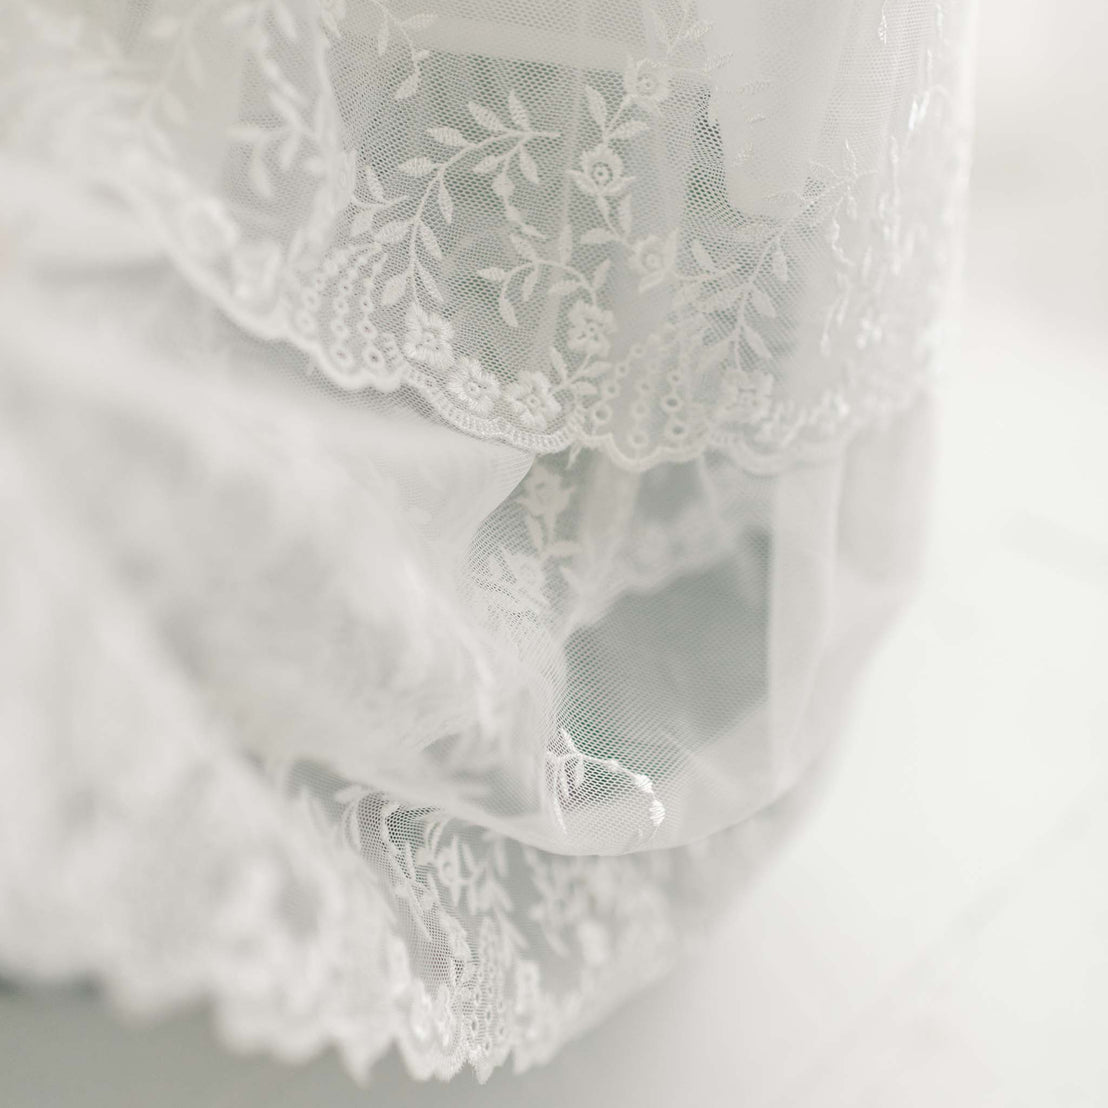 Close-up of the edge of a white lace fabric, displaying intricate floral patterns and delicate detailing. The vintage heirloom style lace, possibly part of an Ella Christening Gown, is beautifully highlighted by soft lighting that accentuates its embroidered netting lace texture and design.